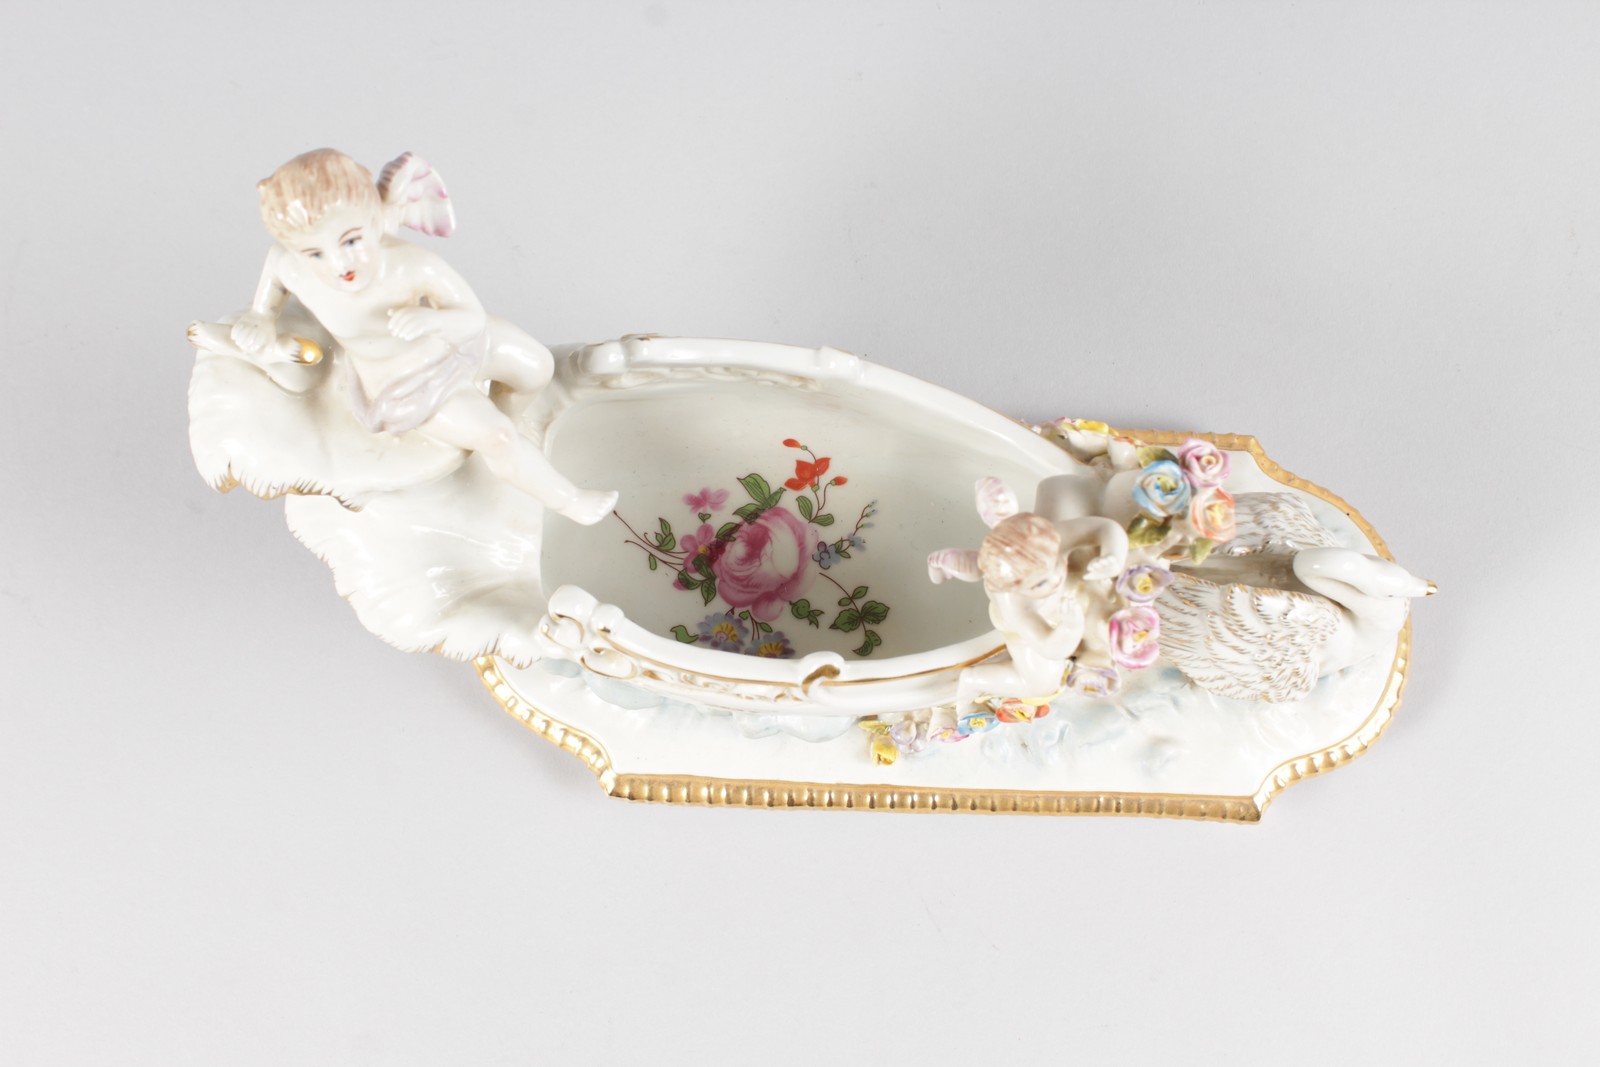 A DRESDEN STYLE PORCELAIN BOAT with swan and cupids. - Image 3 of 4